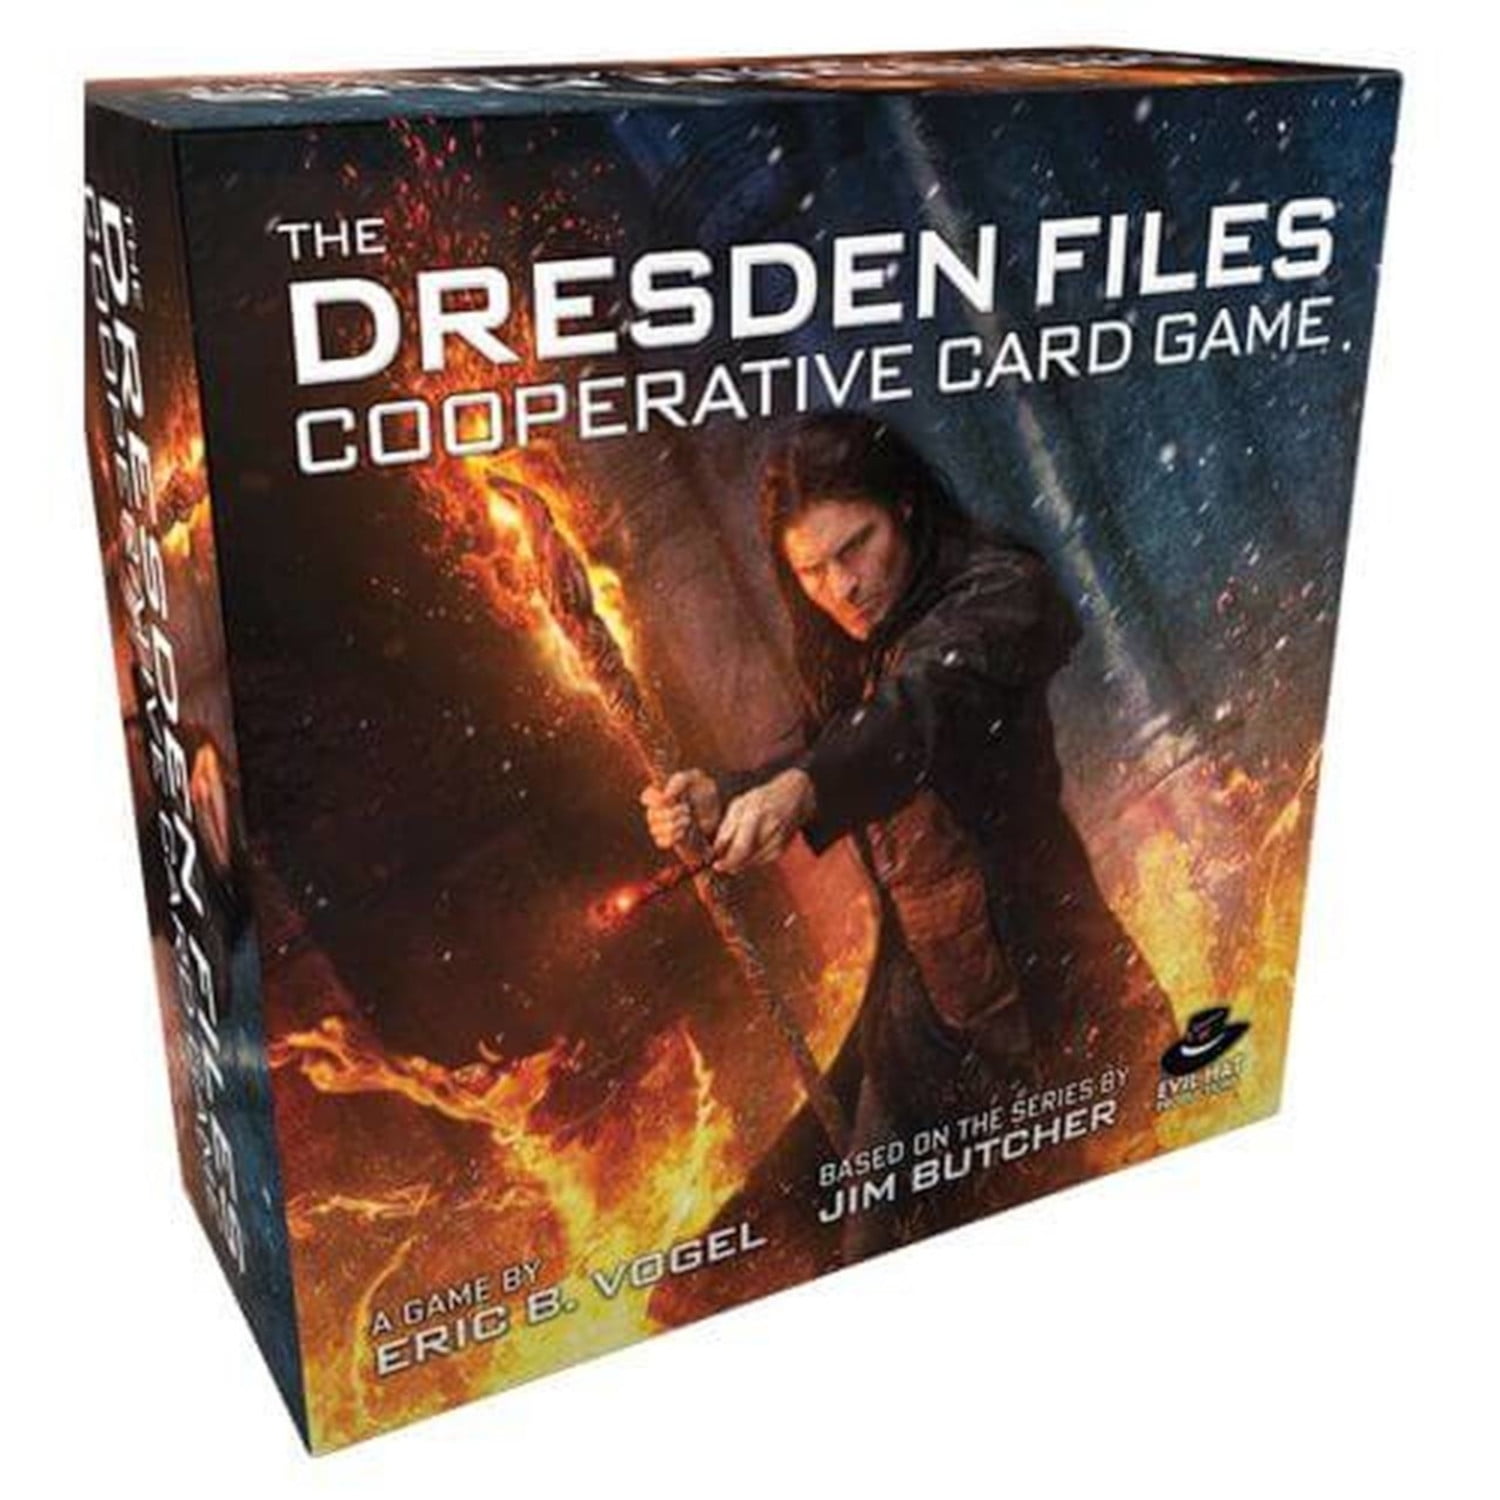 Ehp0022 Dresden Files Cooperative Card Game